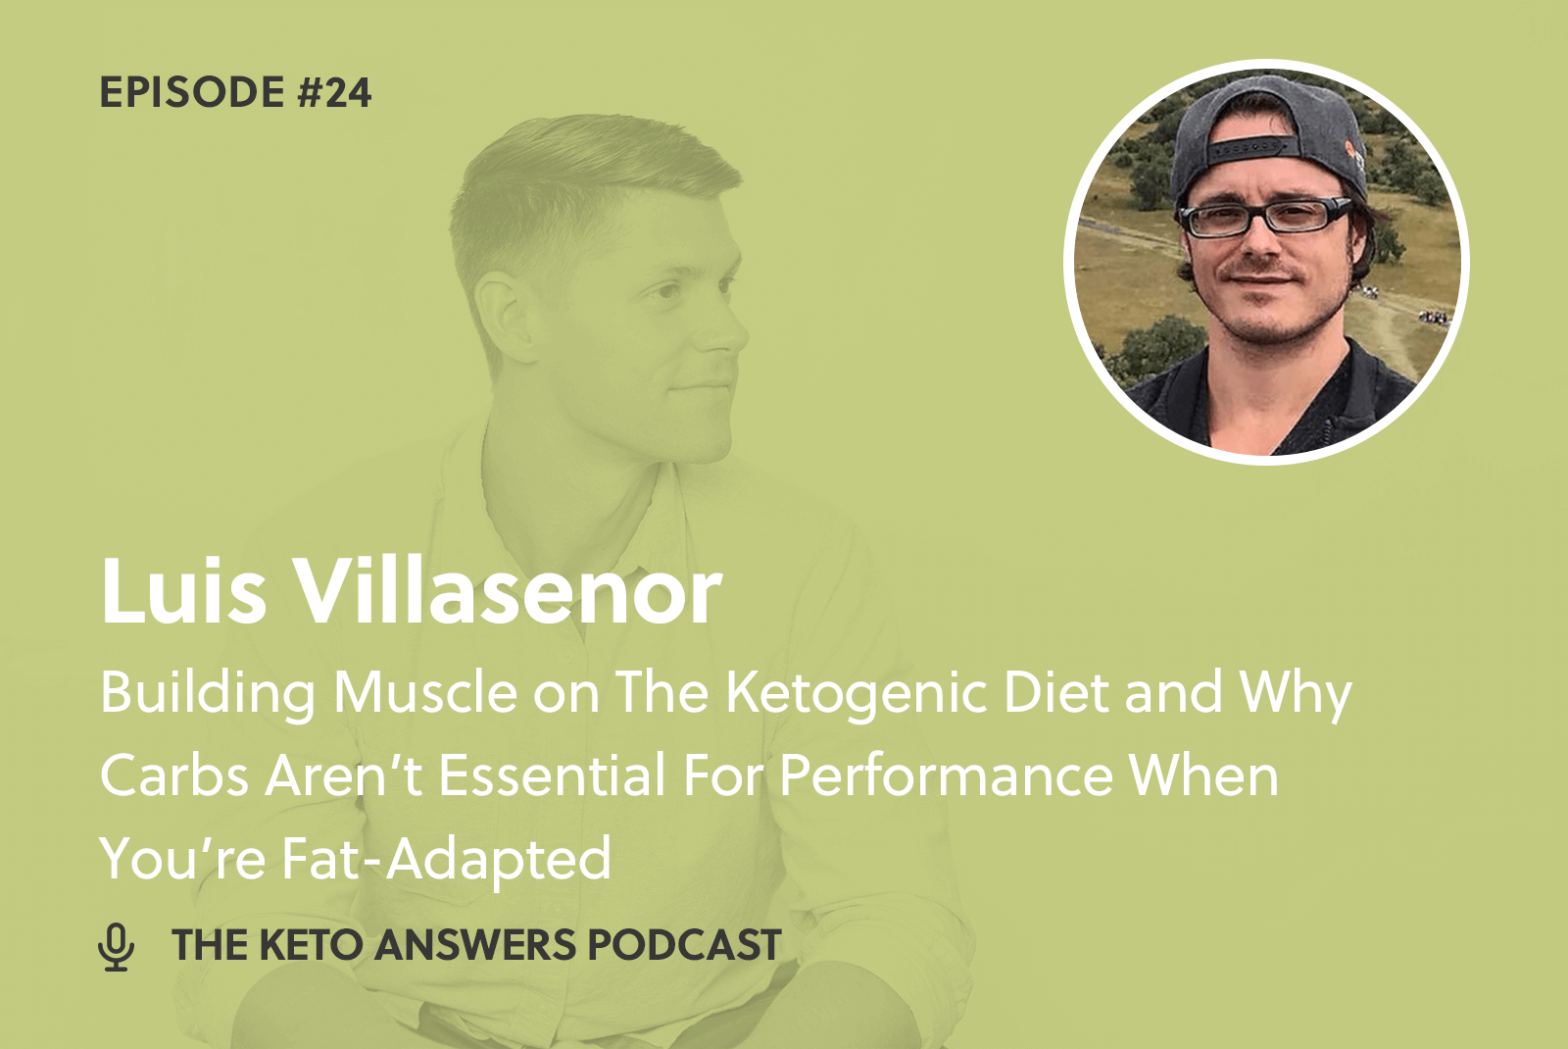 024: Building Muscle on The Ketogenic Diet and Why Carbs Aren’t Essential For Performance When You’re Fat-Adapted - Luis Villasenor